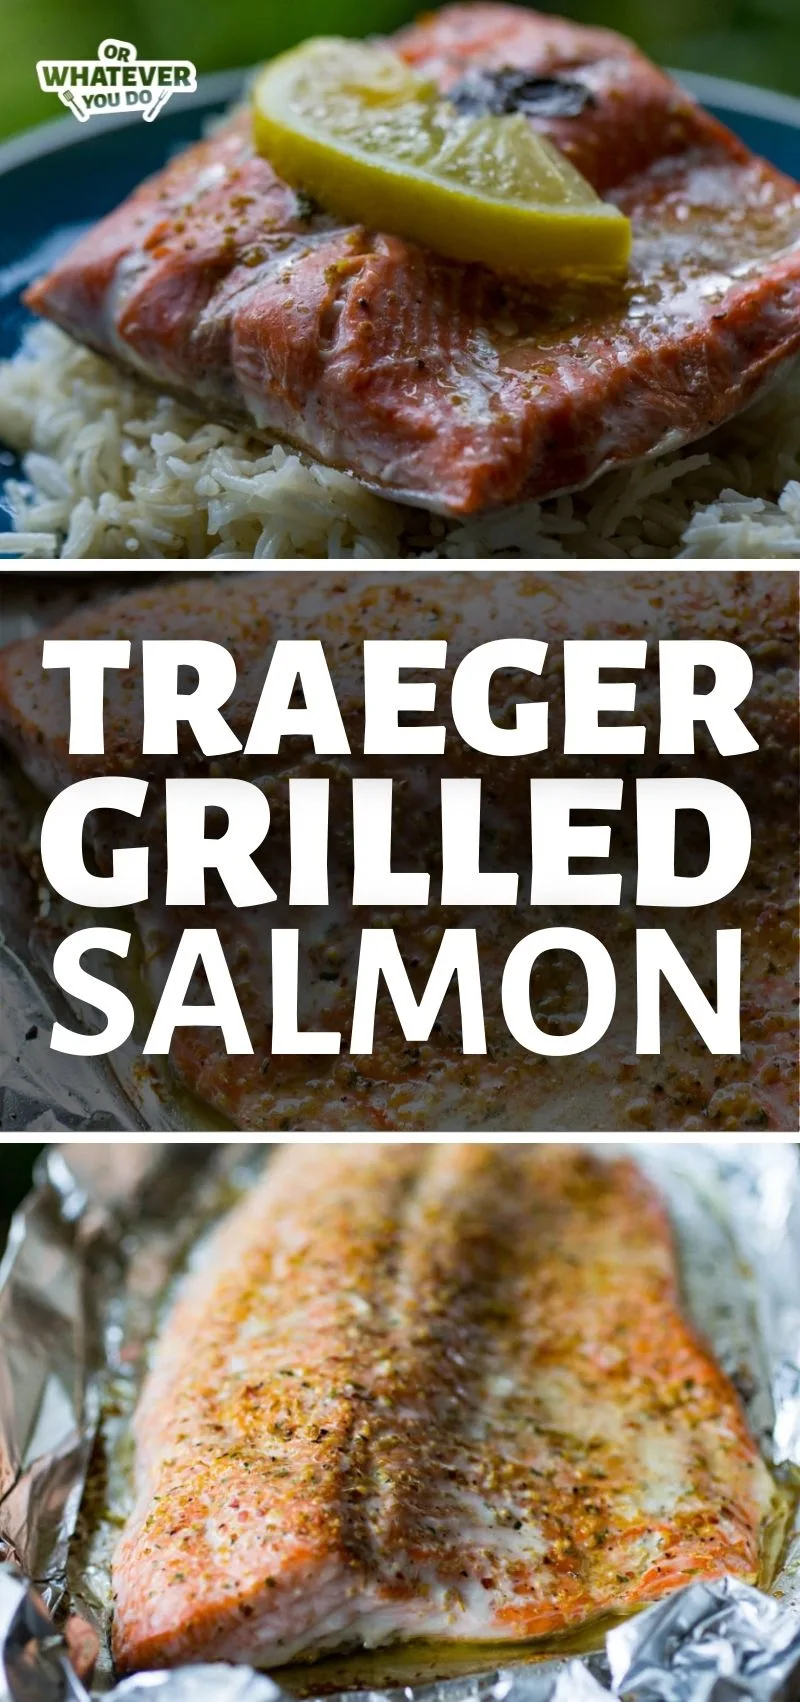 Traeger Grilled Salmon Recipe | Easy Pellet Grill Salmon by OWYD